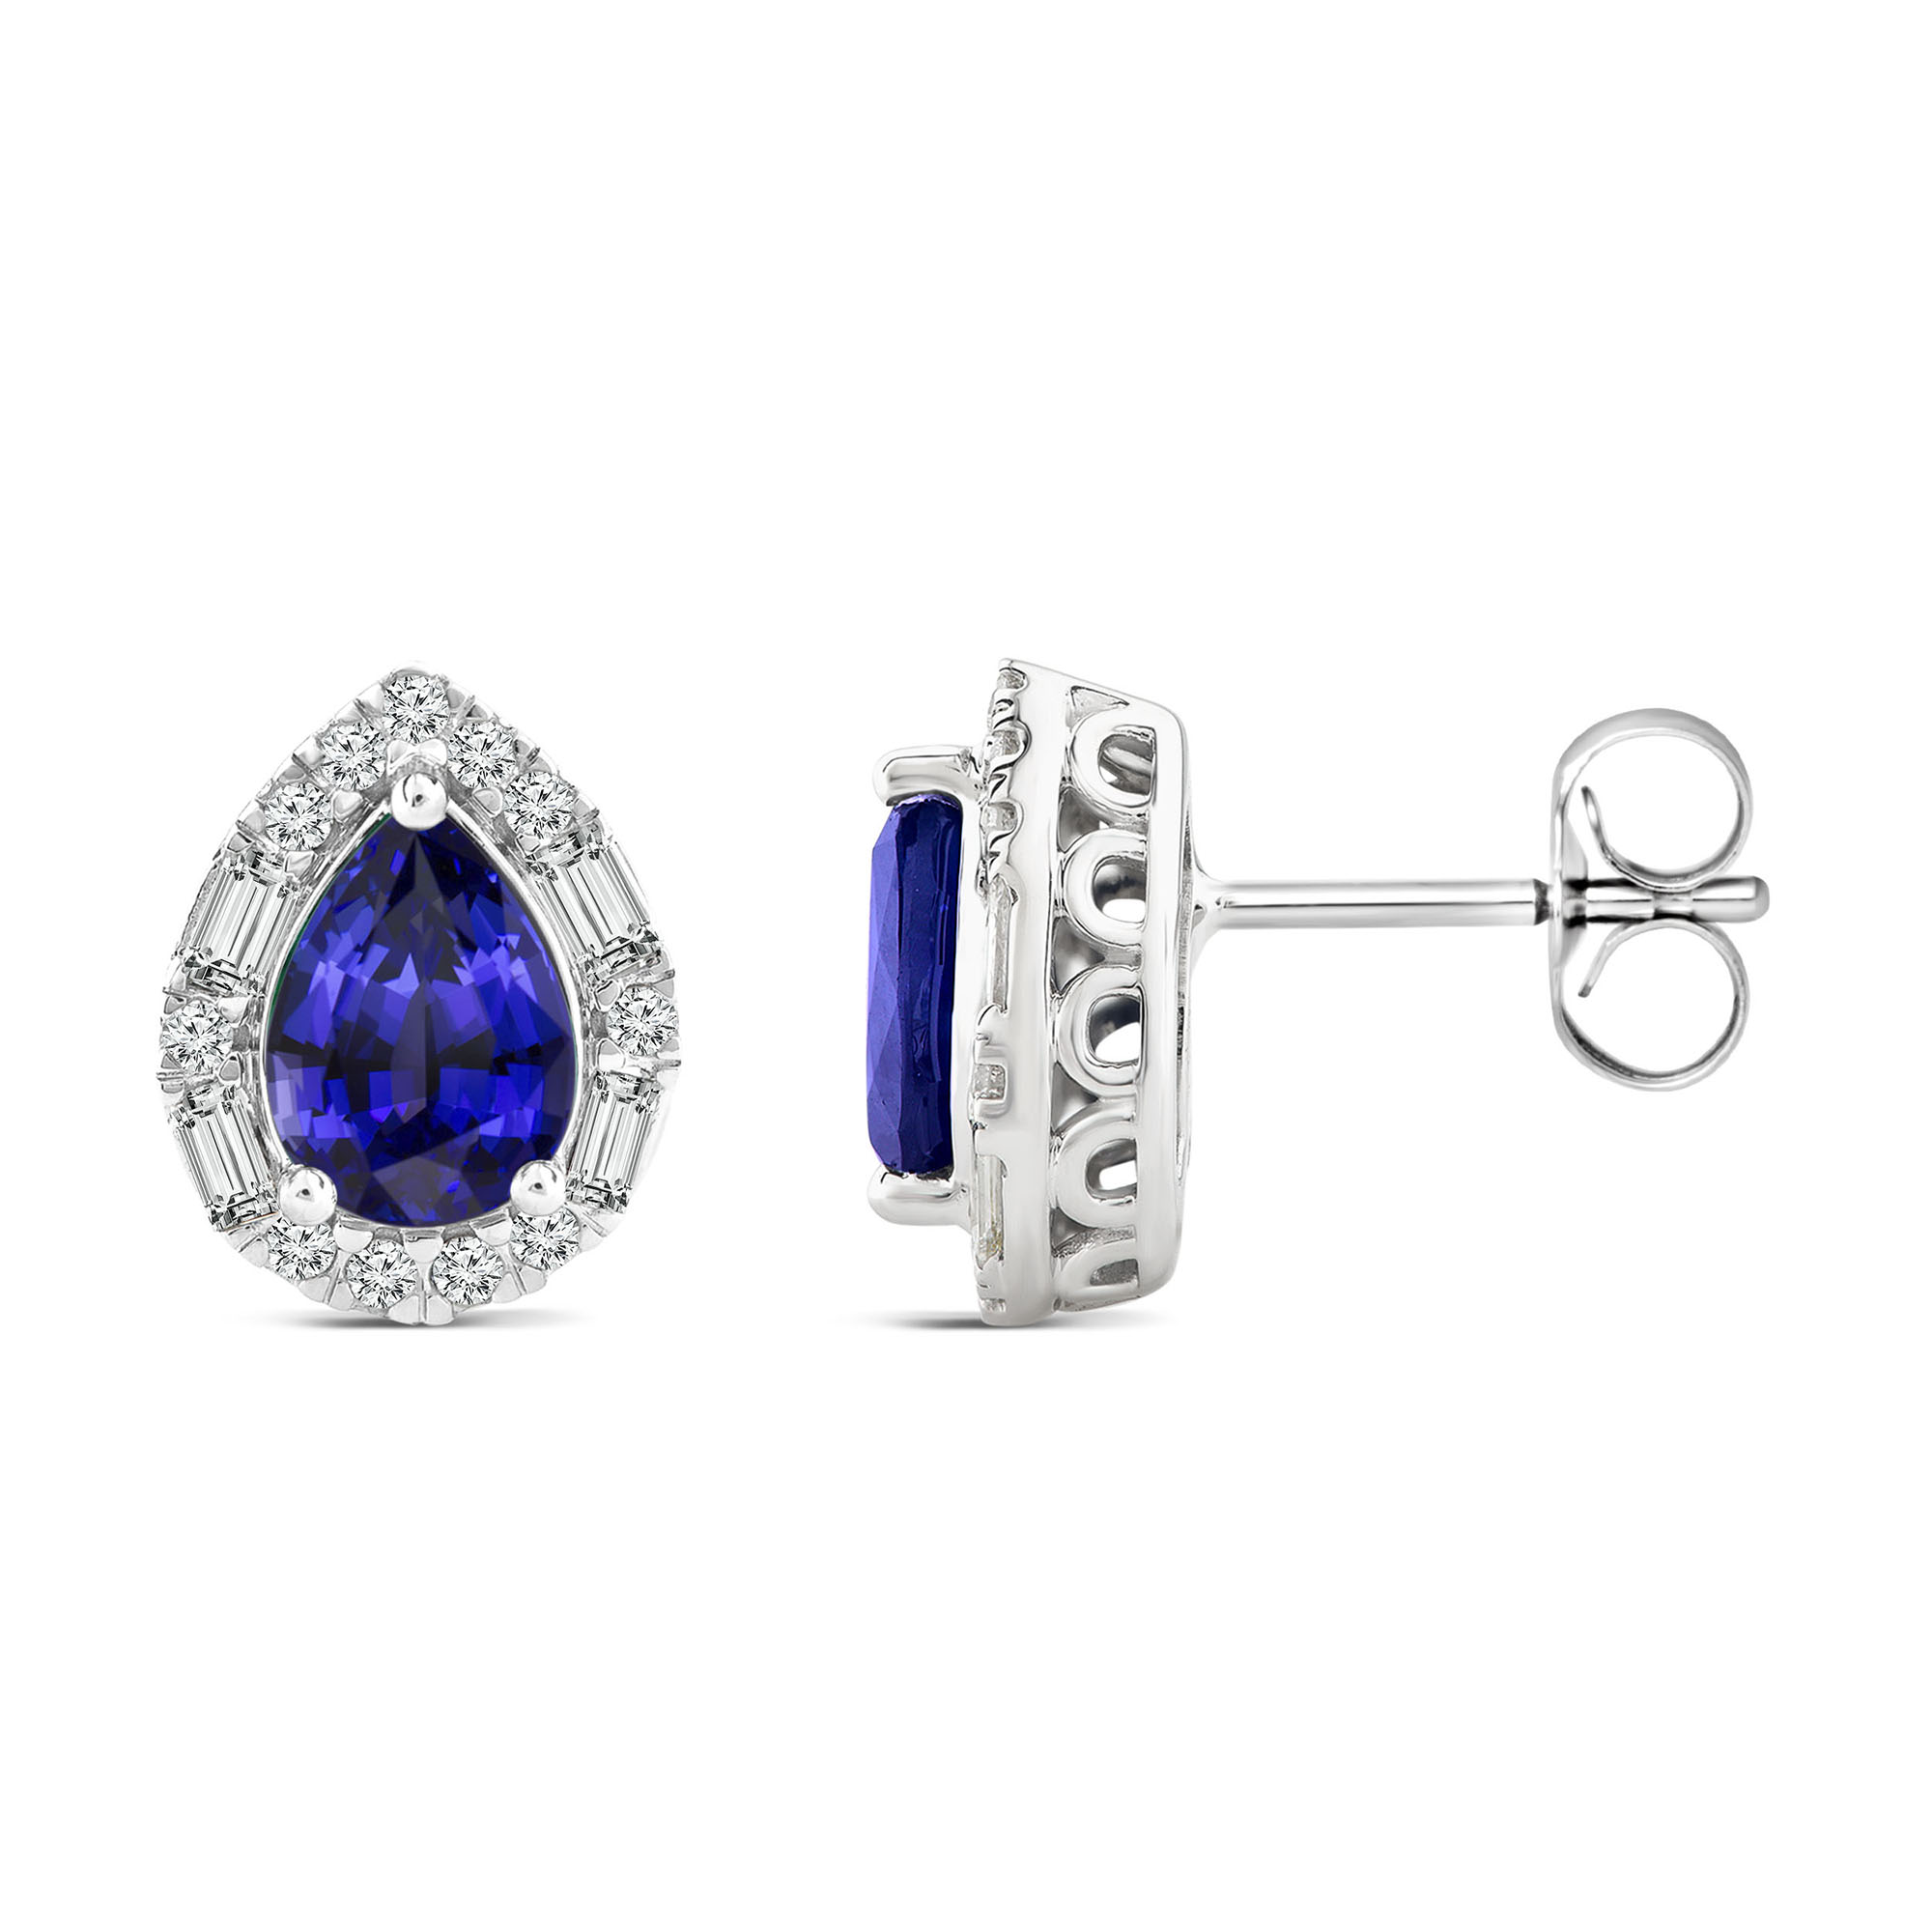 Pear-Shaped Sapphire and Diamond Earrings in 14K White Gold (1/3 ct. tw.)